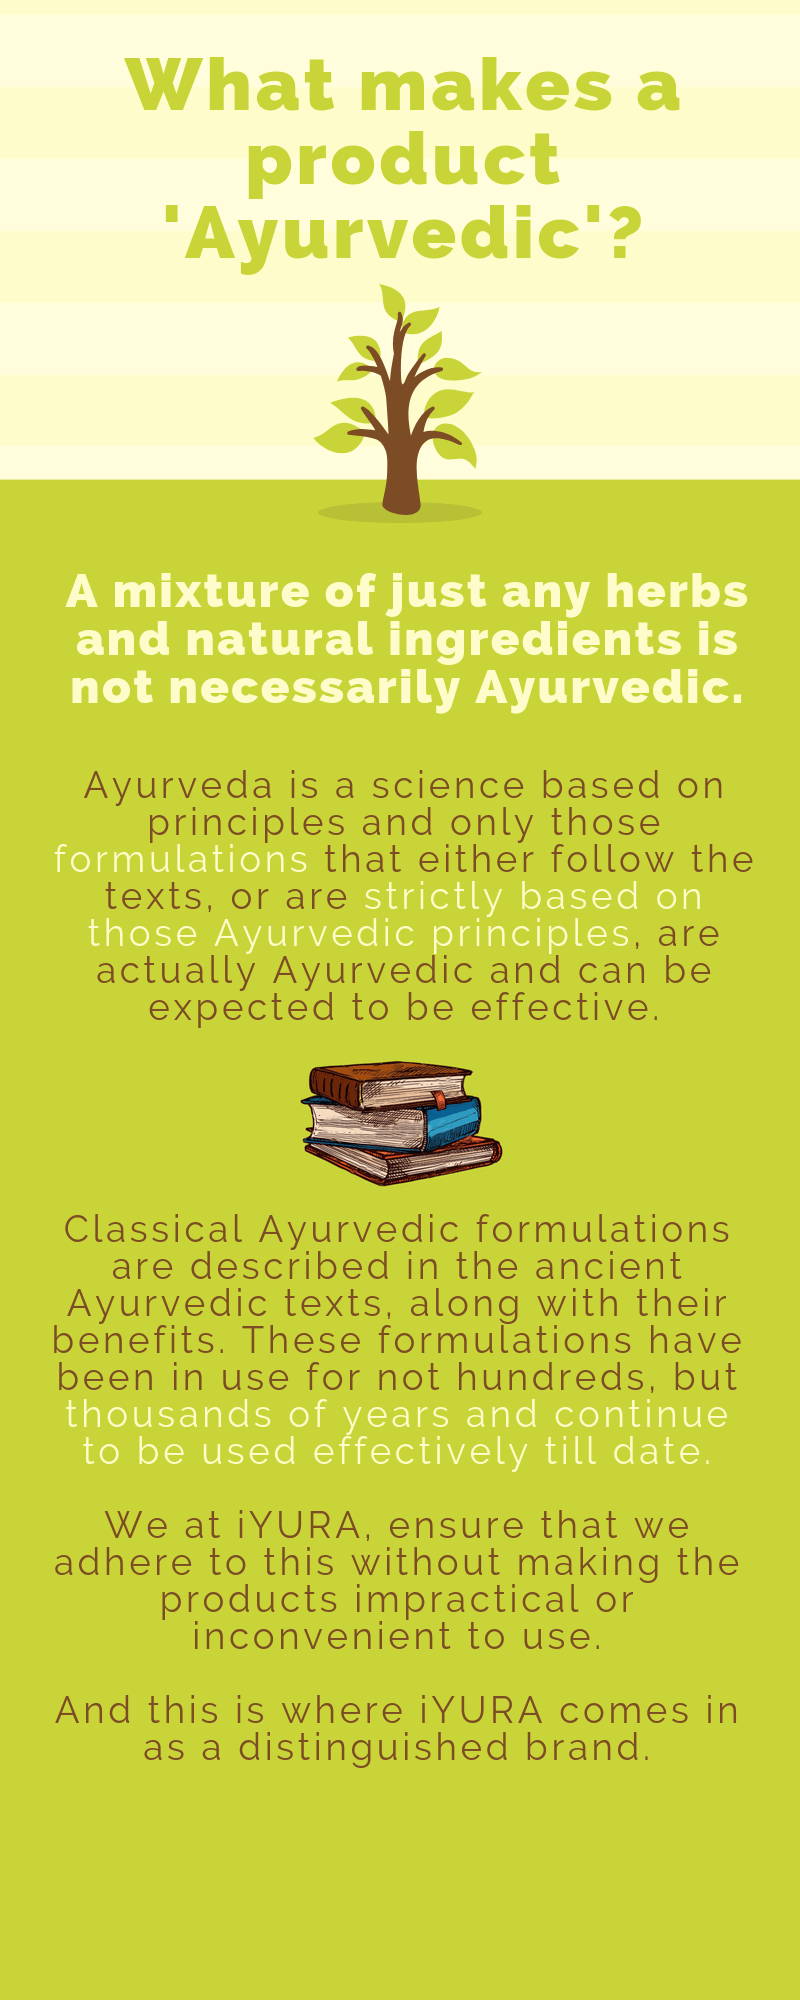 What makes a product Ayurvedic?